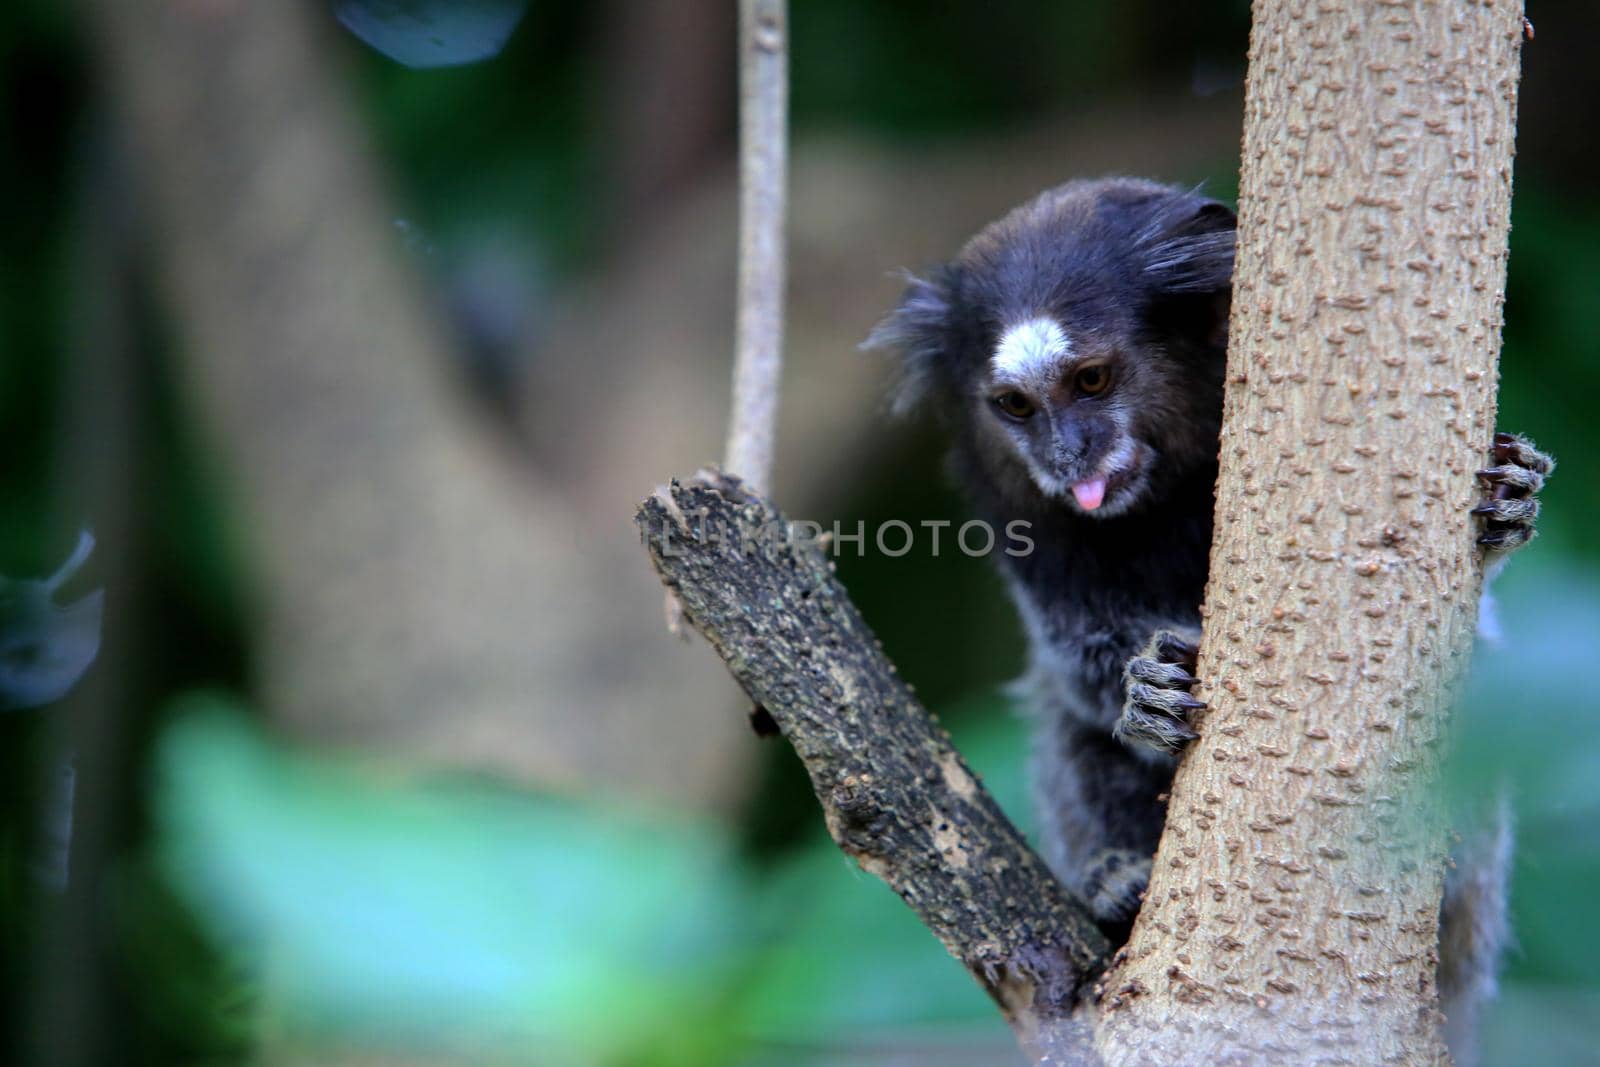 salvador, bahia / brazil - august 18, 2017: marmoset is seen on tree in the heart of mary village at Largo Dois de Julho in the city of Salvador.


